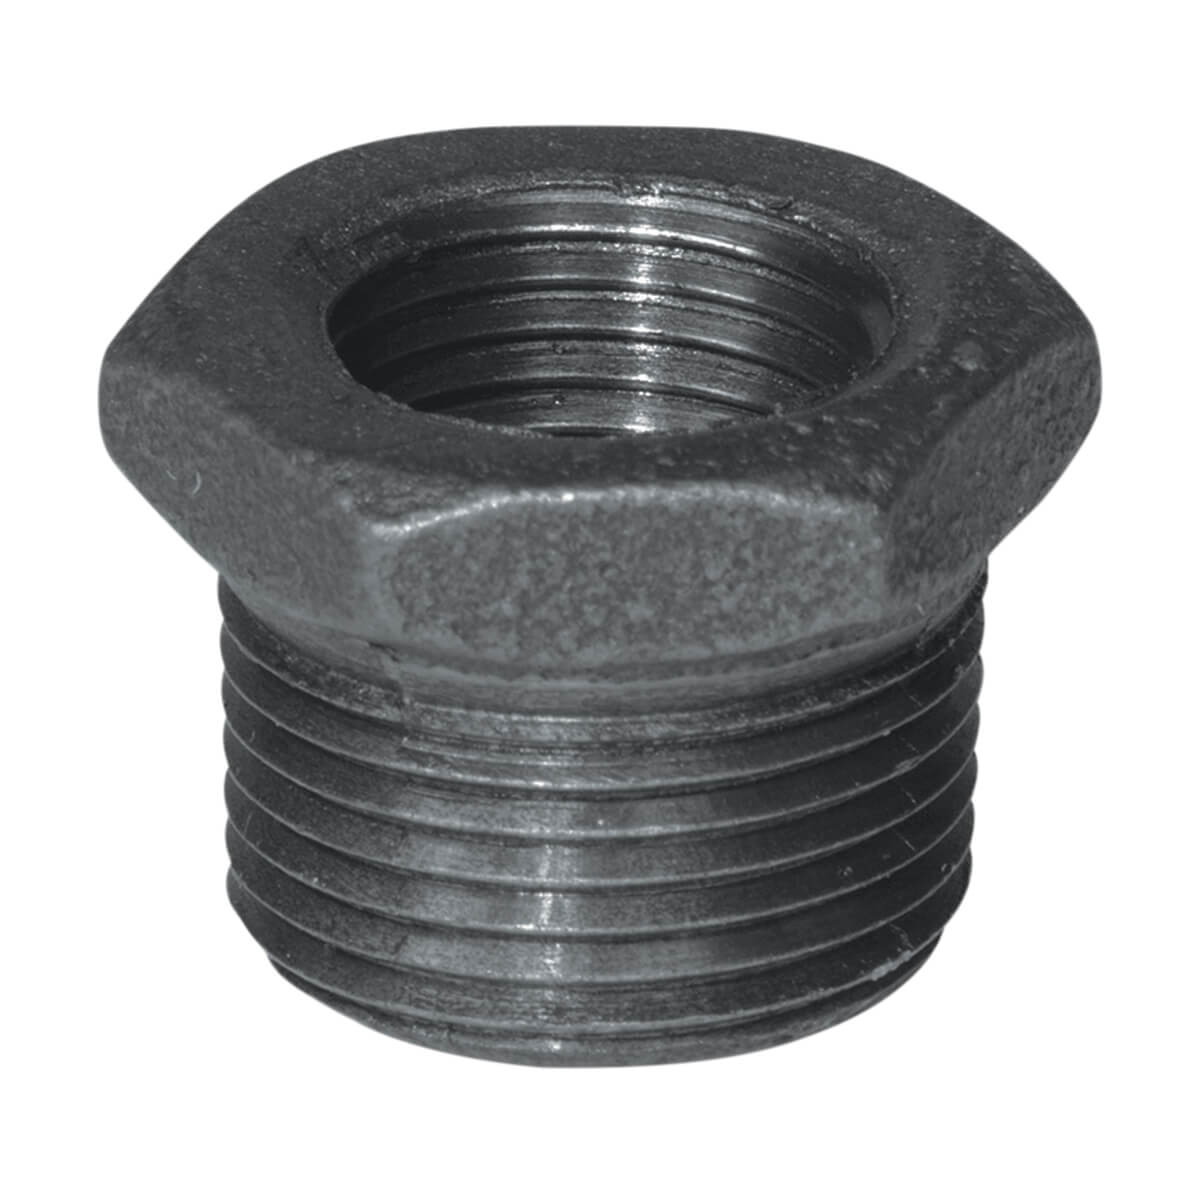 Fitting Black Iron Hex Bushing - 3/4-in x 1/2-in